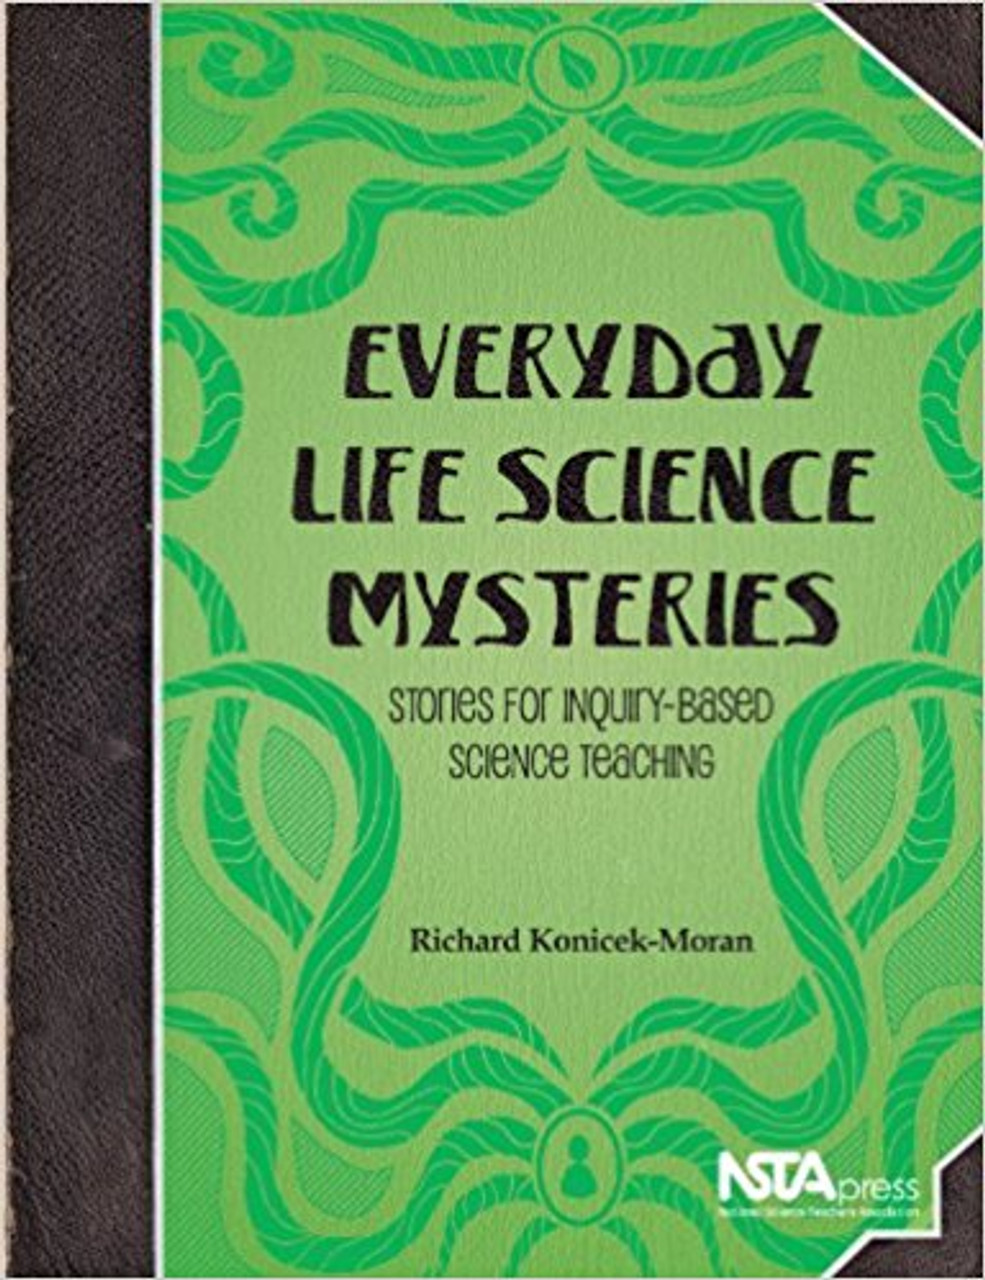 Everyday Life Science Mysteries: Stories for Inquiry-Based Science Teaching by Richard Konieck-Moran